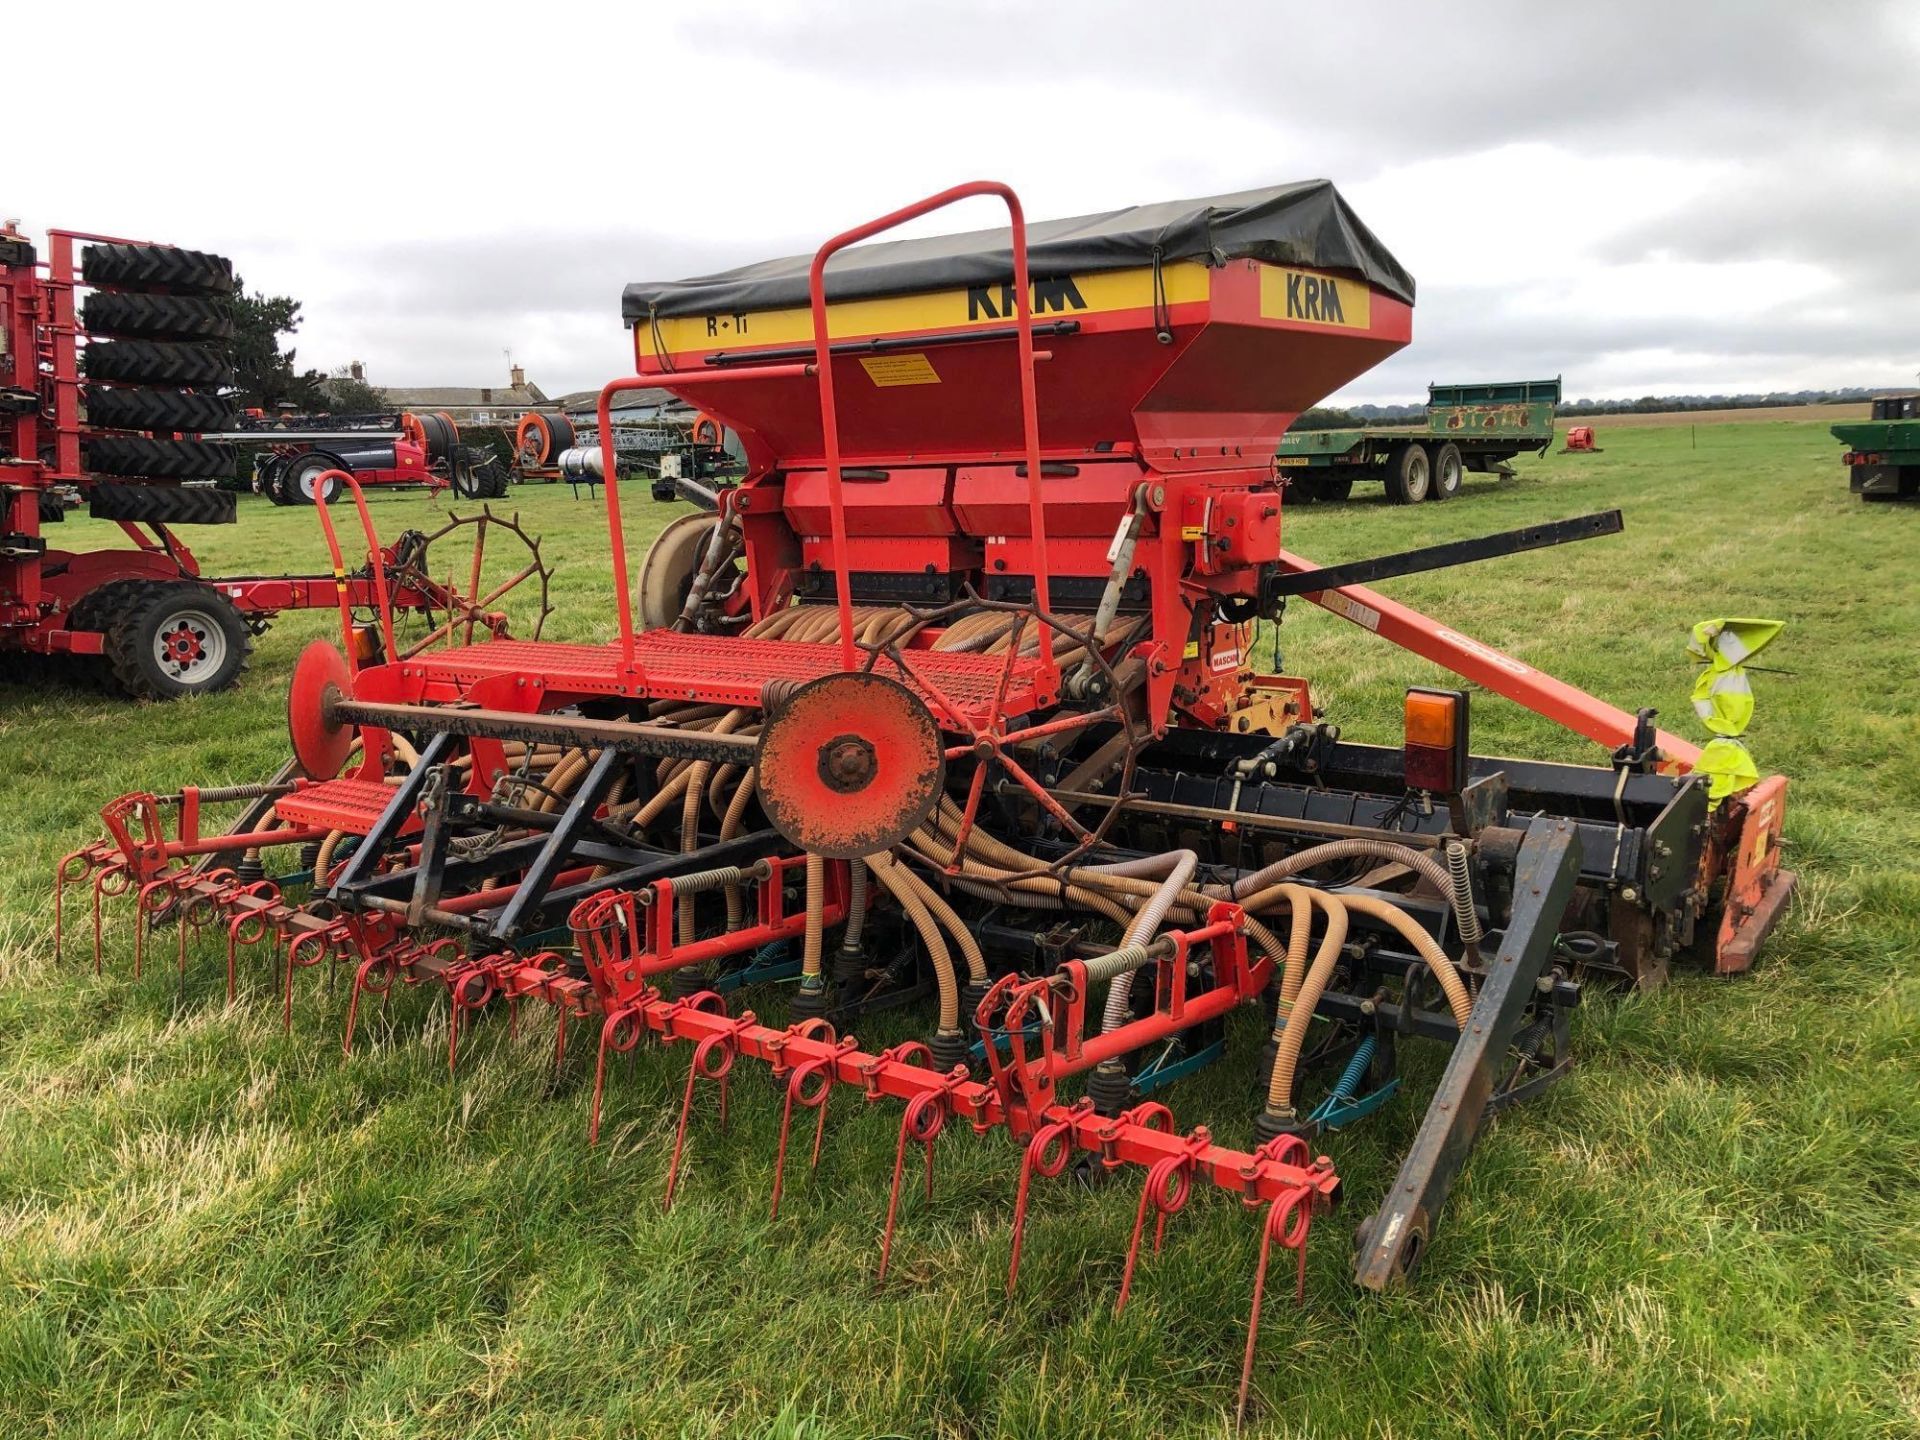 2003 Maschio Reco Tiller DM4000 4m power harrow with rear packer roll and 2000 KRM RTi 2 4m combinat - Image 4 of 13